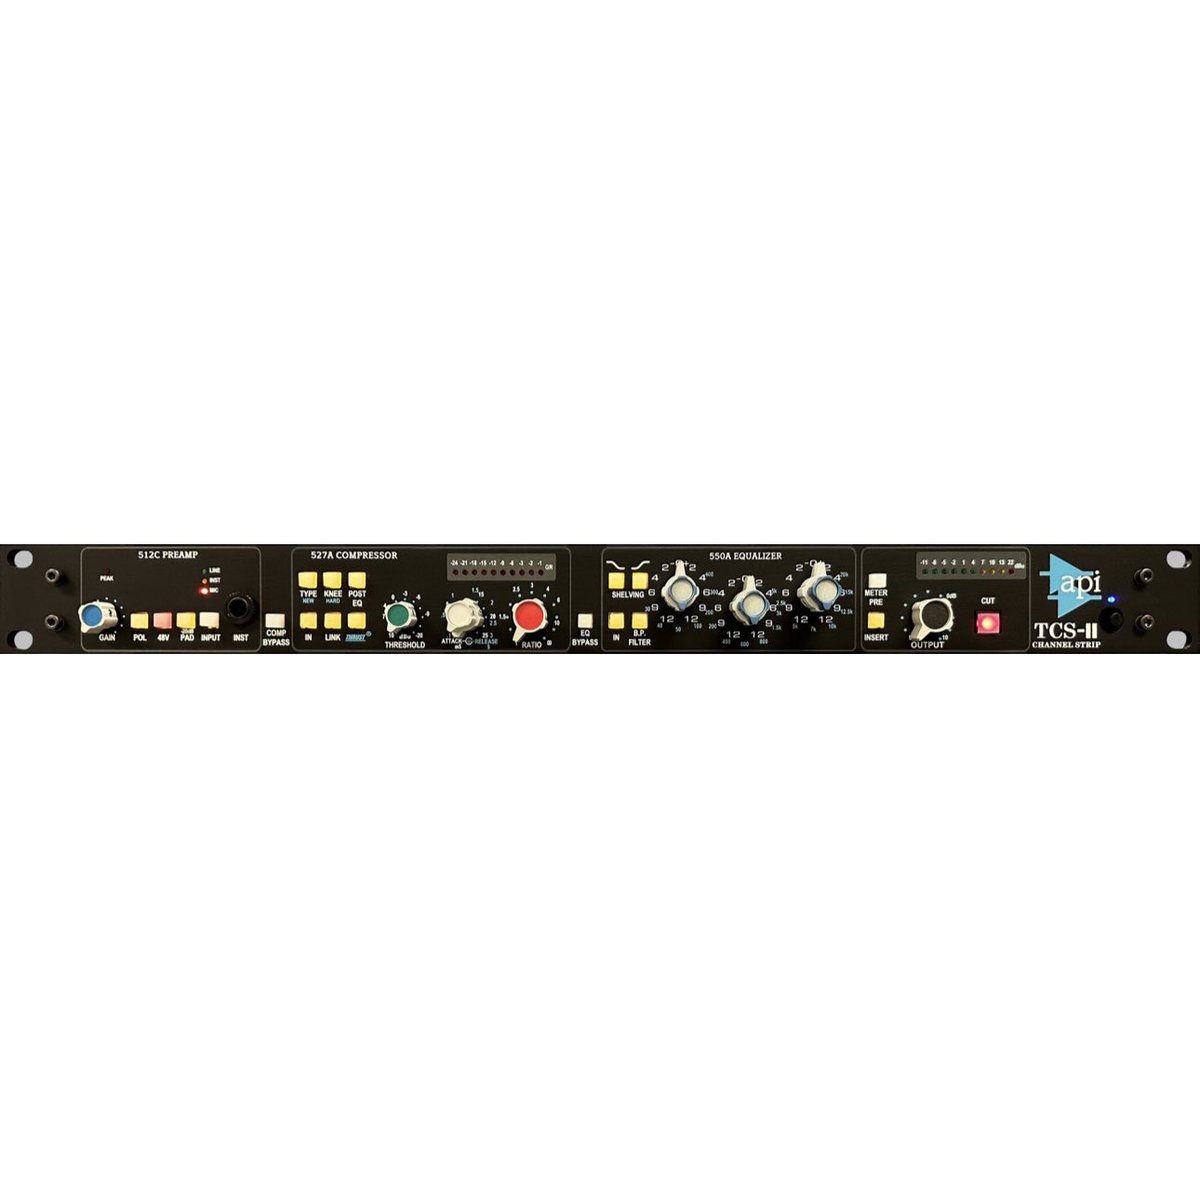 With thousands of The Channel Strip in service, API announces the release an updated version of the original unit, now called the TCS-II. For more information visit apiaudio.com or contact your preferred API Dealer. #apiaudio #apithechannelstrip #recording #studiogear